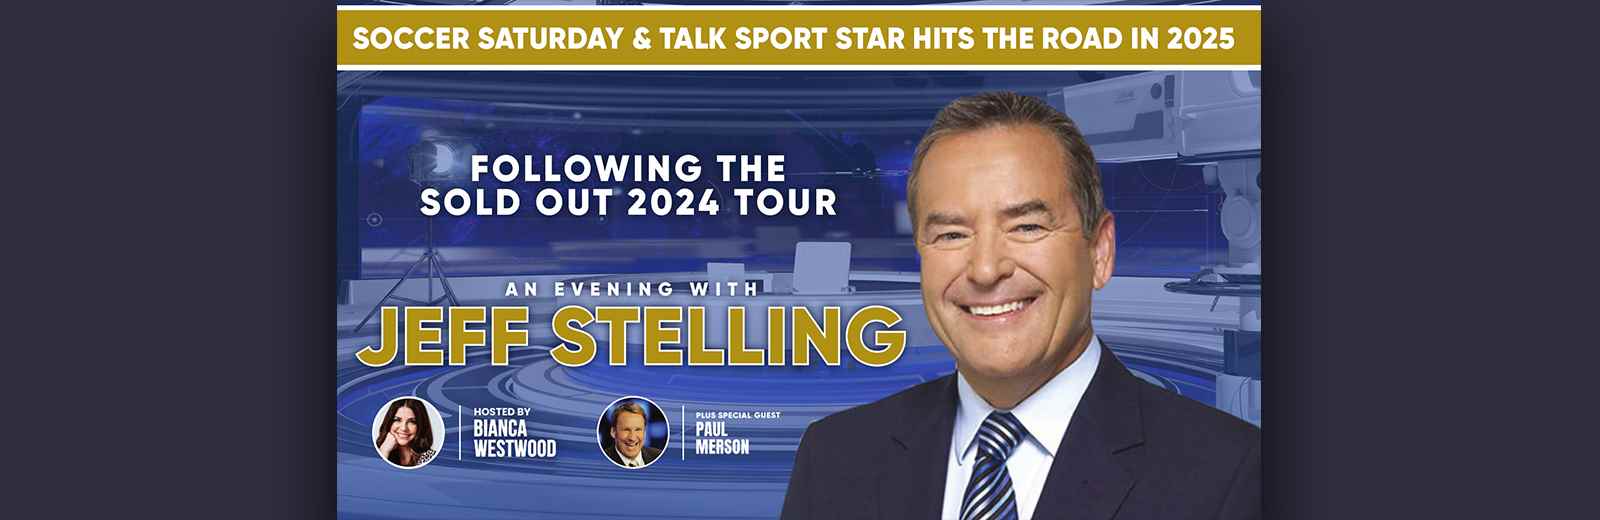 An Evening with Jeff Stelling, hosted by Bianca Westwood